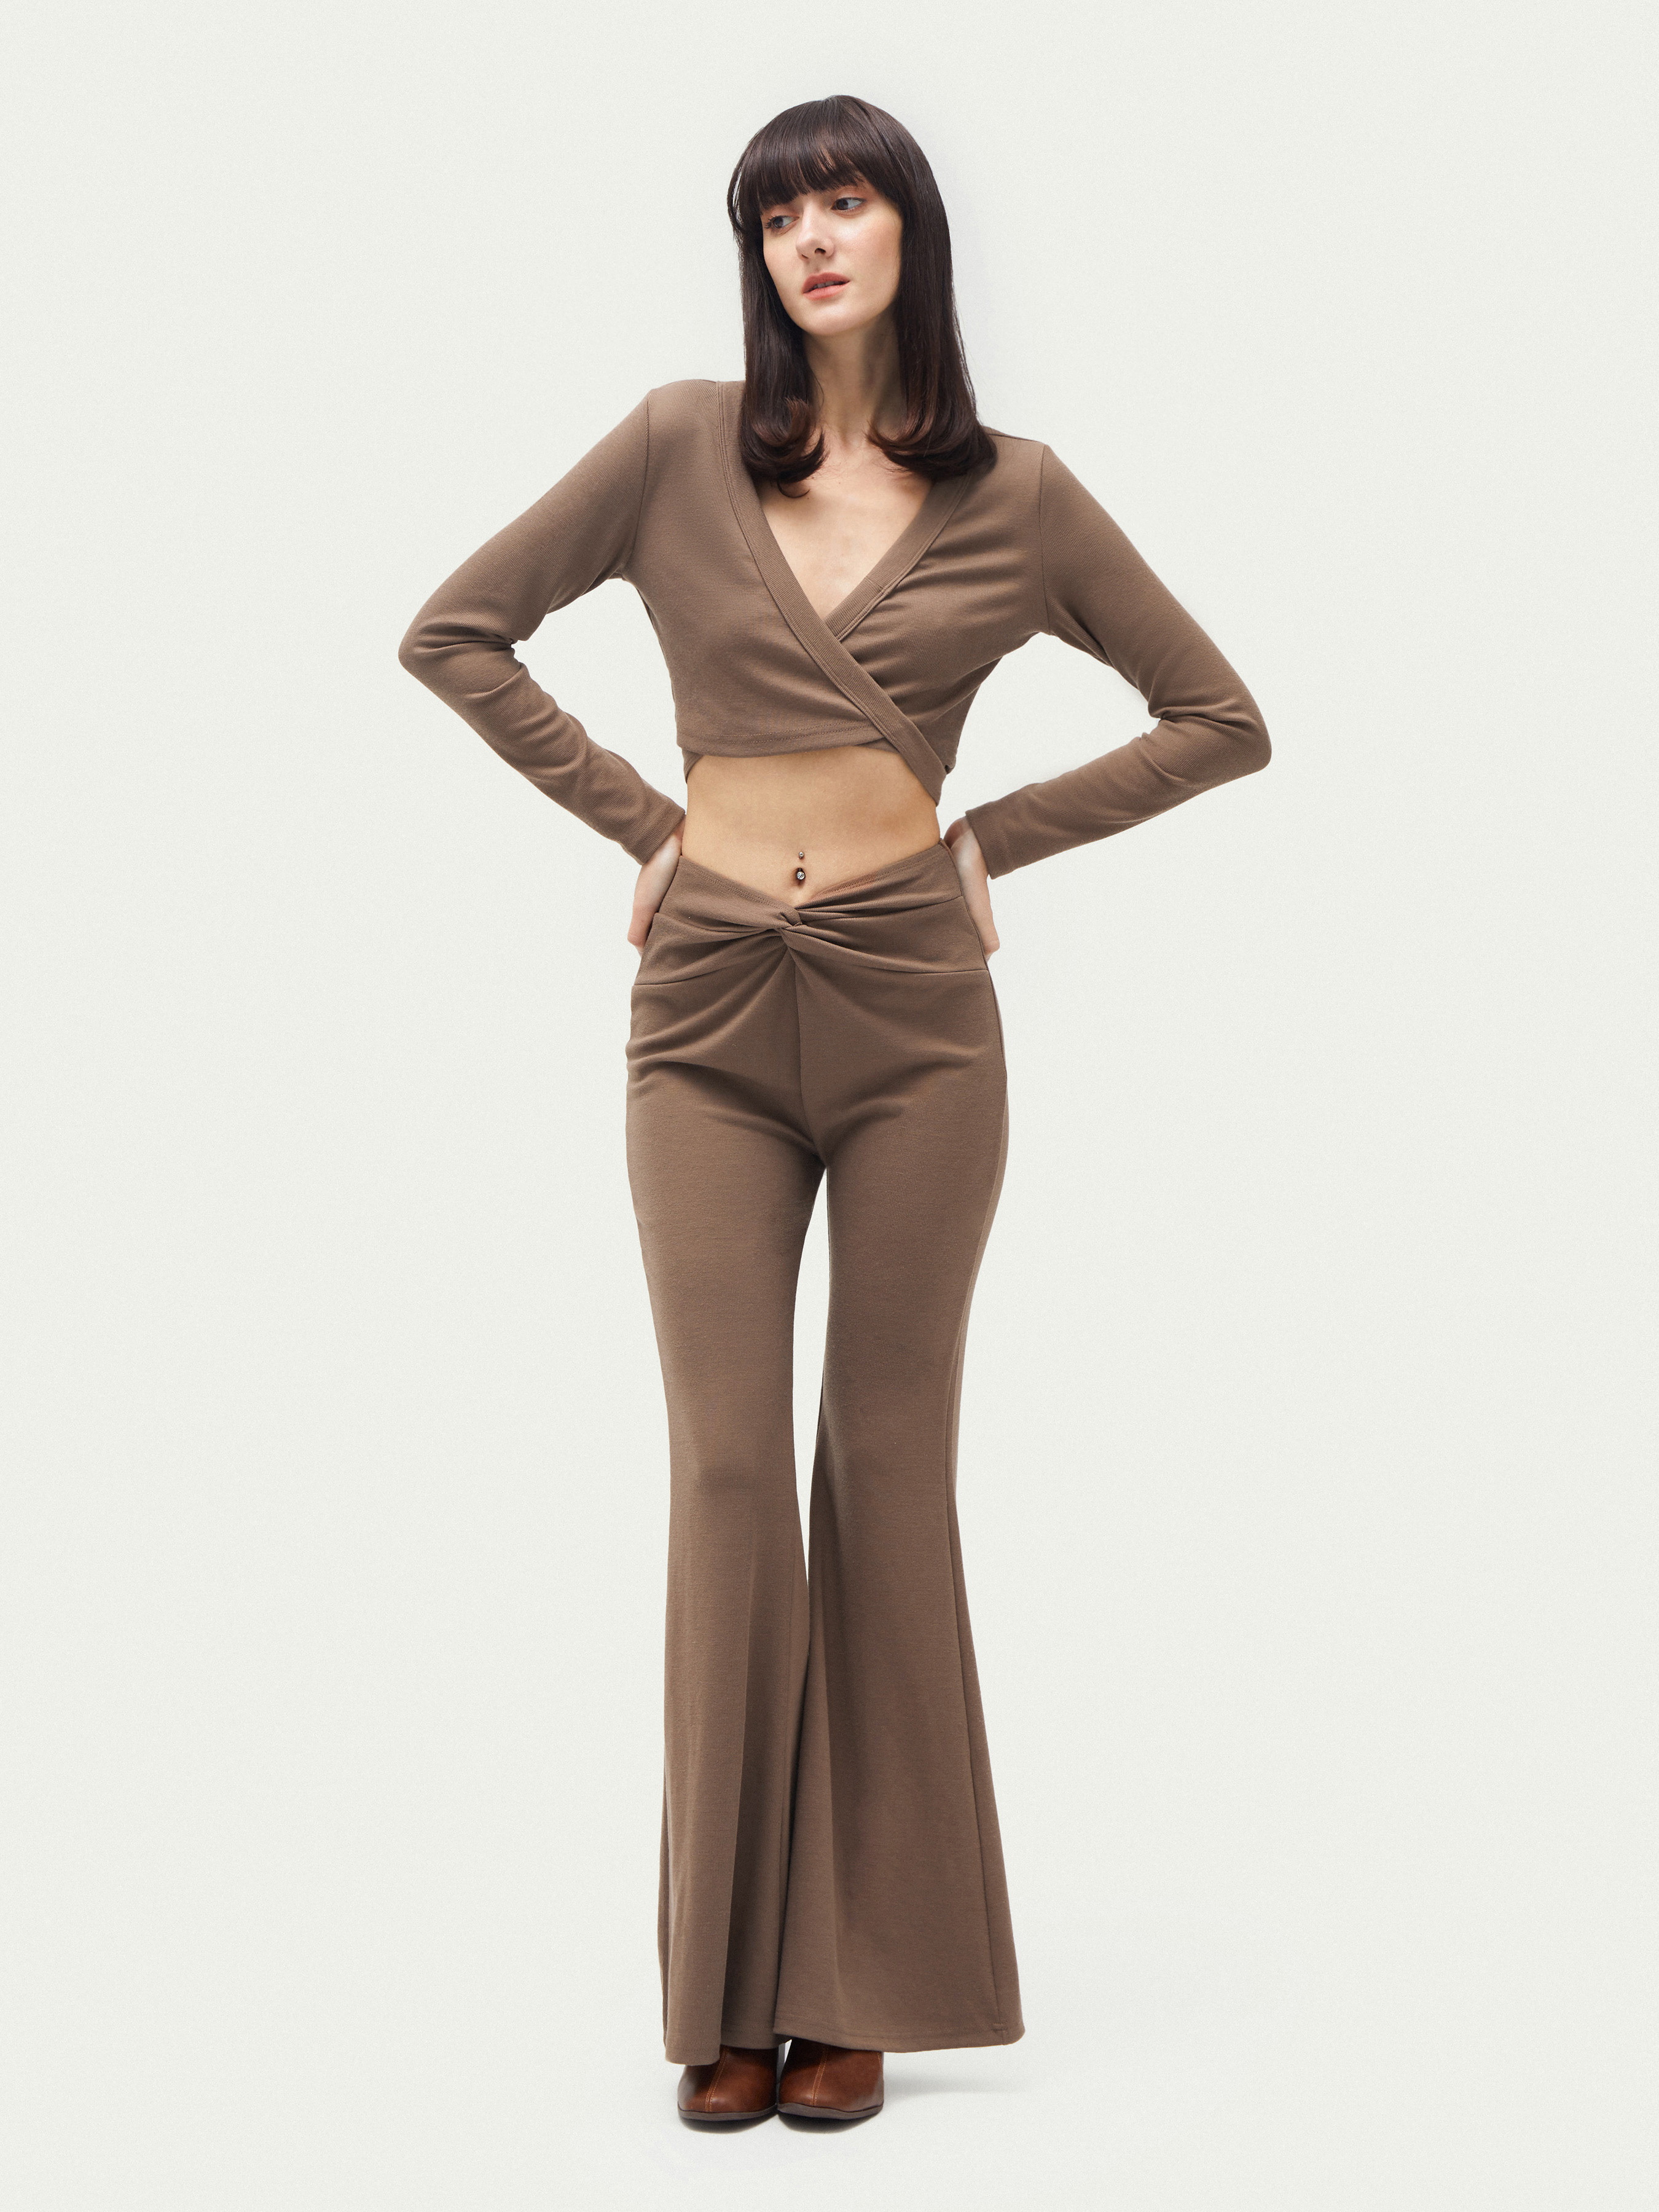 Milk Chocolate Ruched Flare Trousers